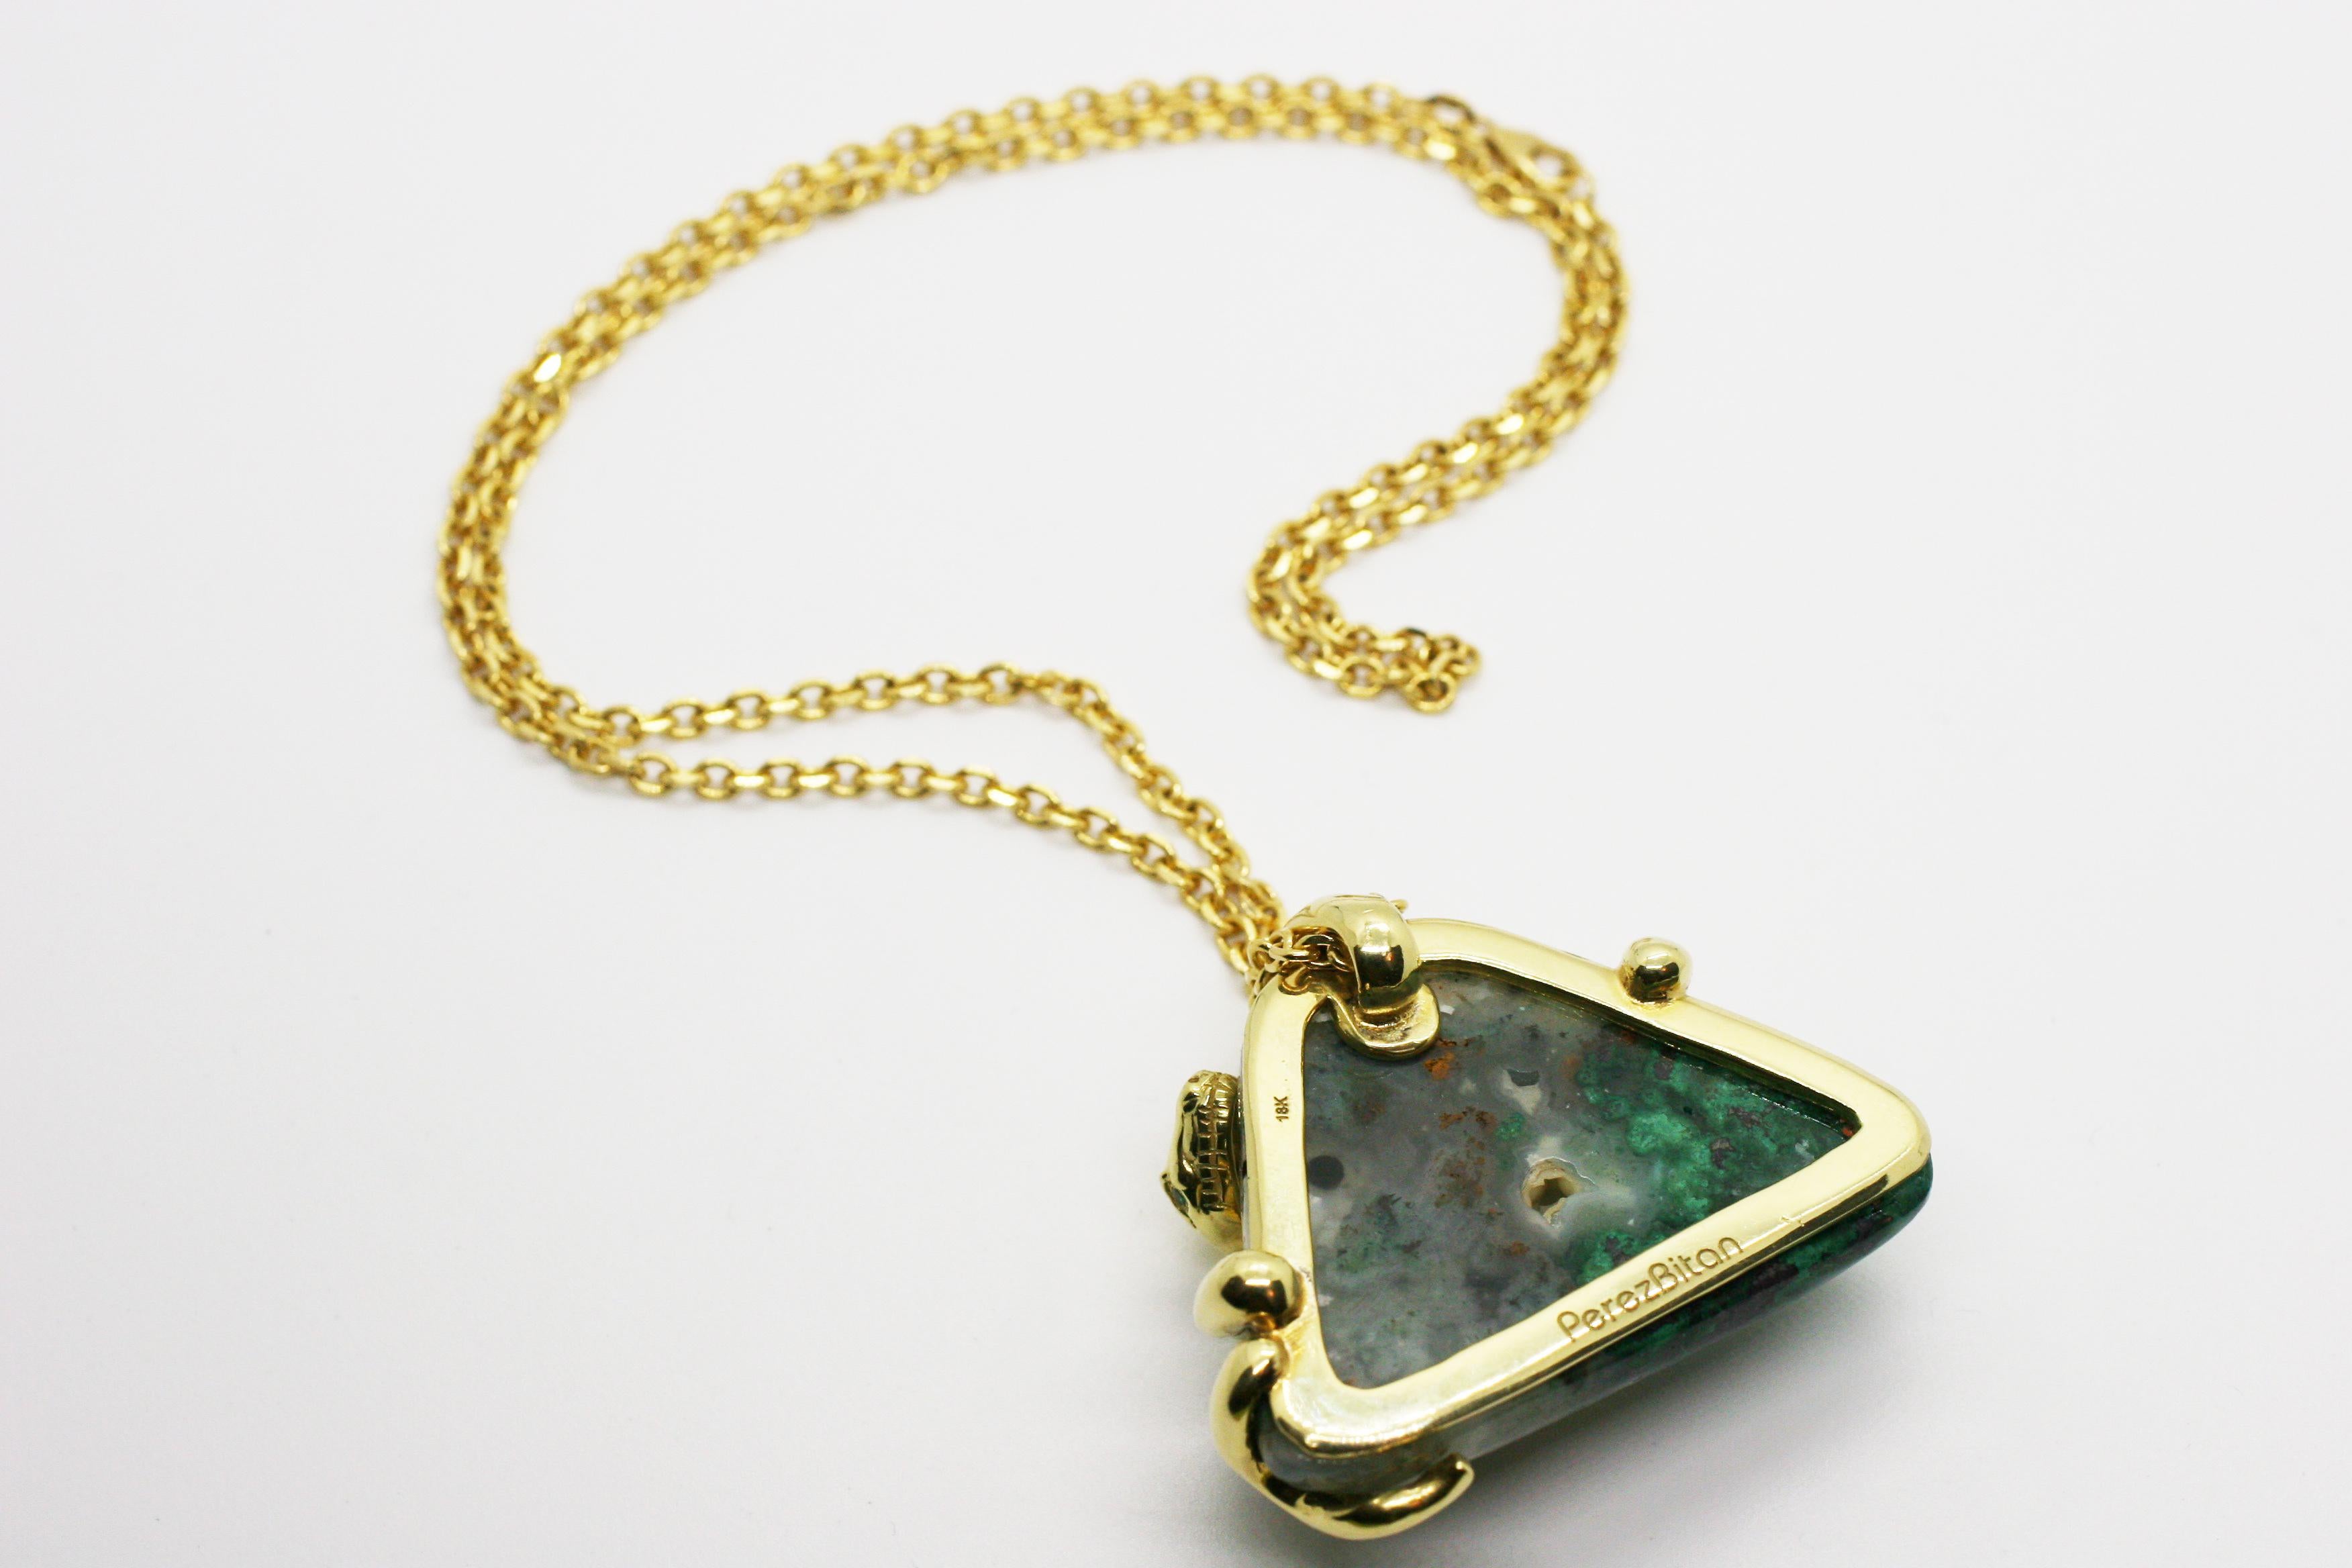  18 Karat One of A Kind LargeAustralian Chrysocolla Snake Pendant Chain Necklace For Sale 1